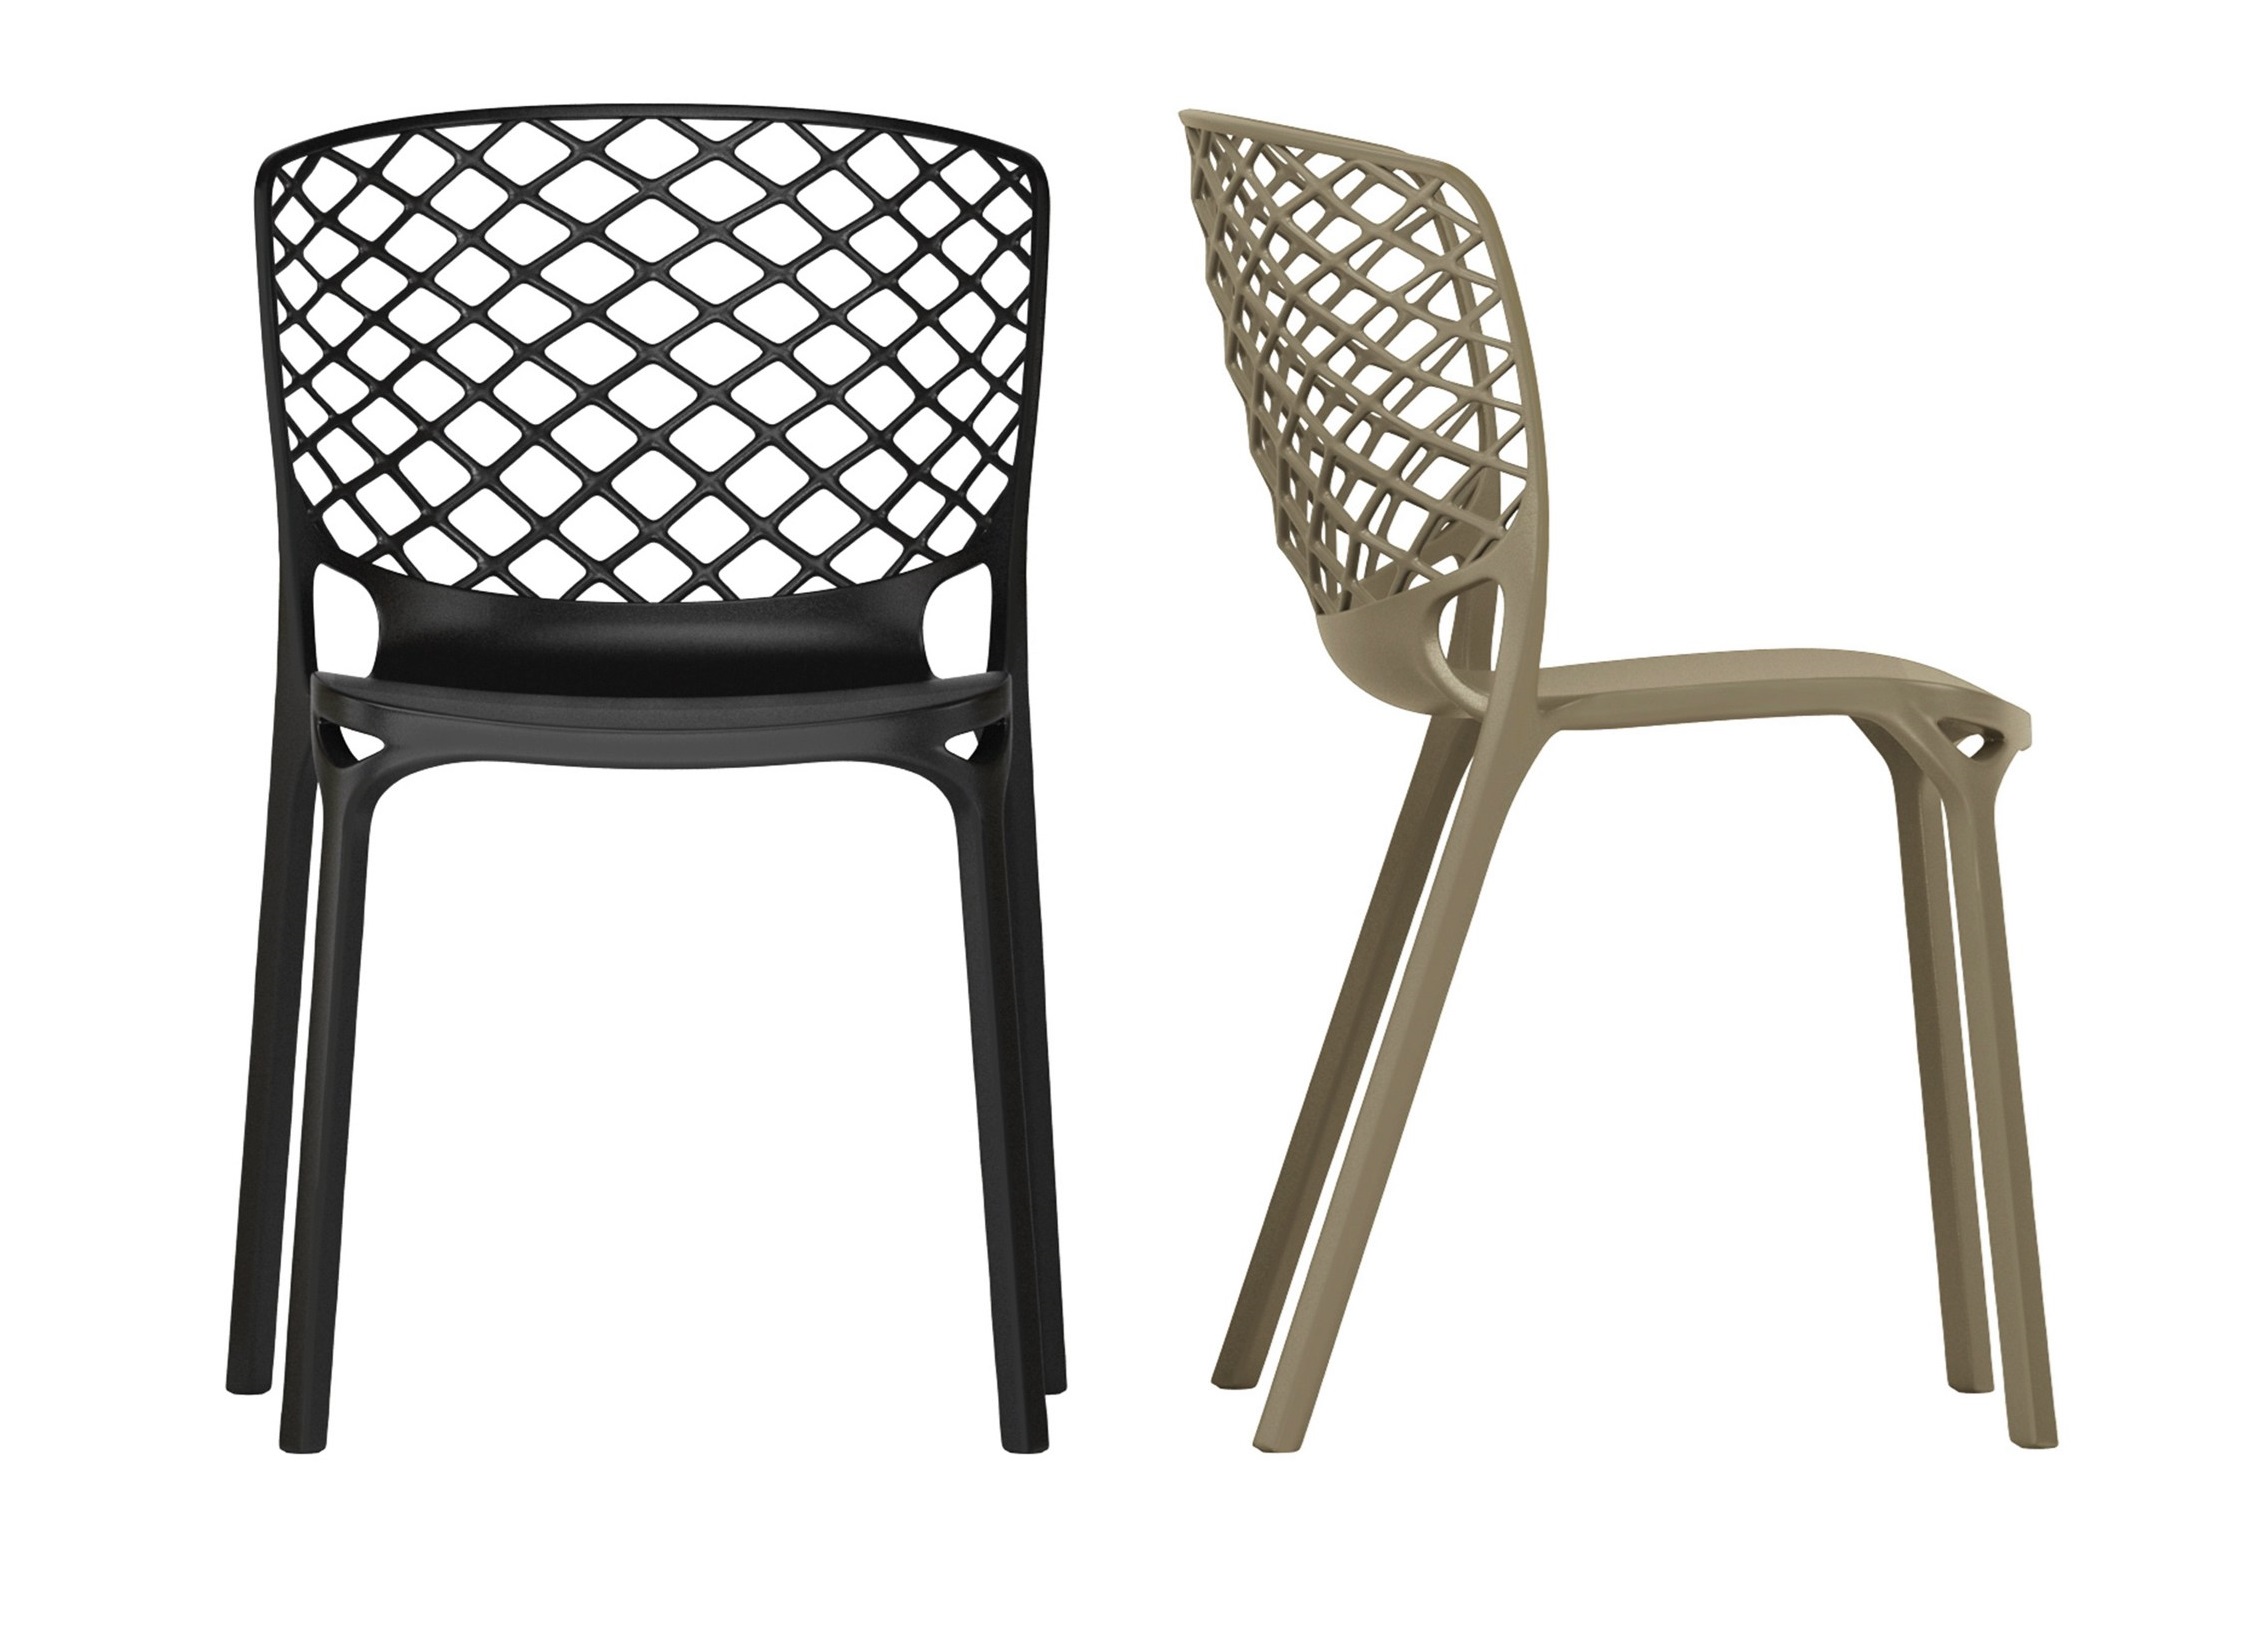 GAMERA CHAIR Design by  Dondoli and Pocci PP plastic 530 x 530 x 810 mm Price: 1.300.000 VND